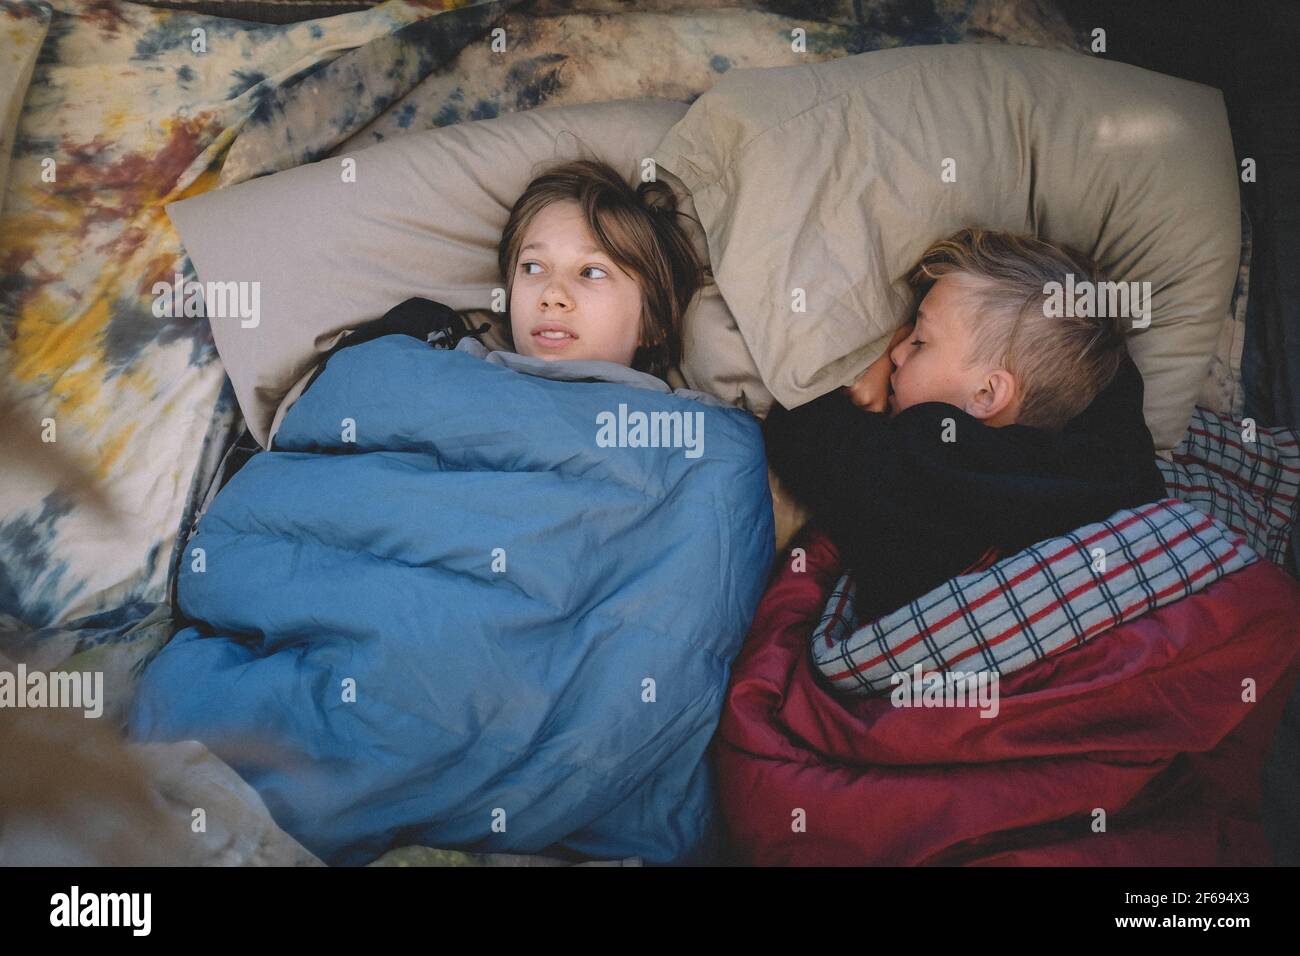 Two Friends Side by Side in Sleeping Bags. One looks scared. Stock Photo